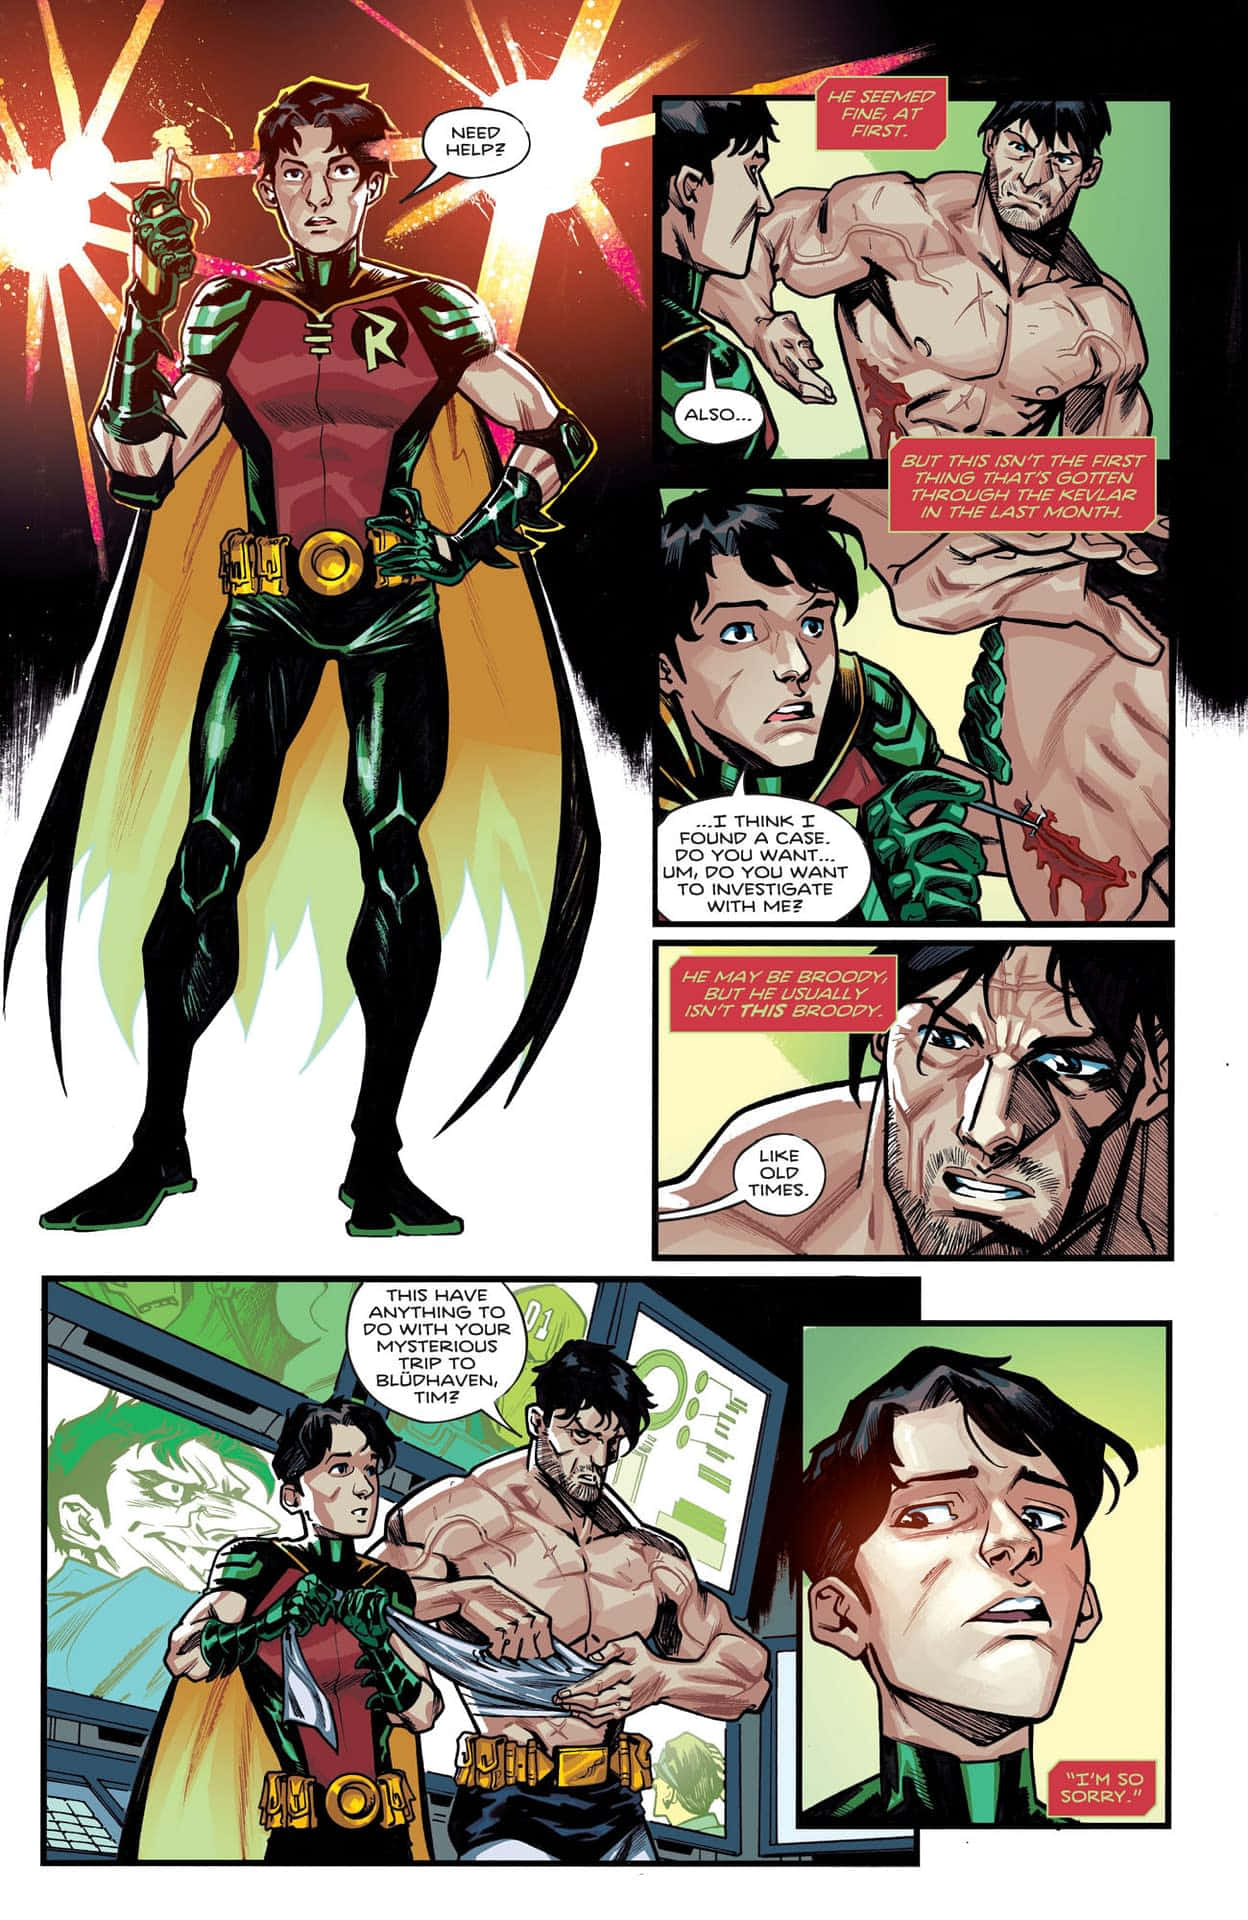 Tim Drake - The Red Robin in Action Wallpaper